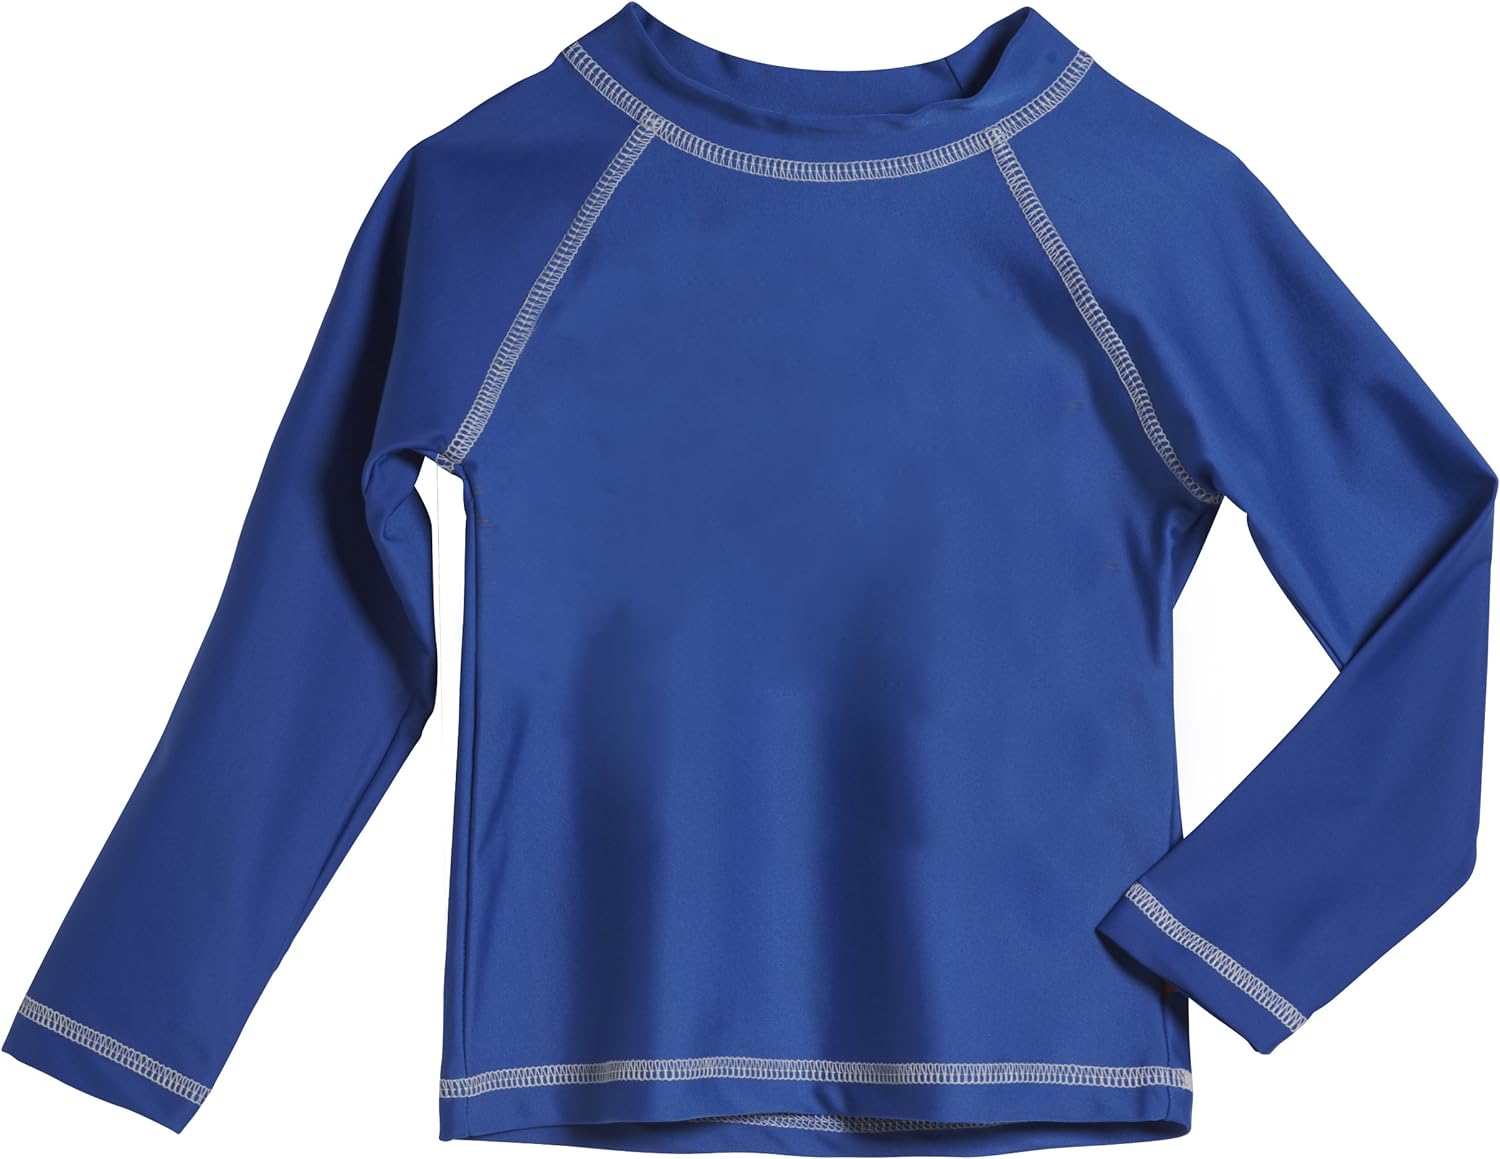 Made in USA City Threads Baby Rash Guard in Long and Short Sleeves with SPF50